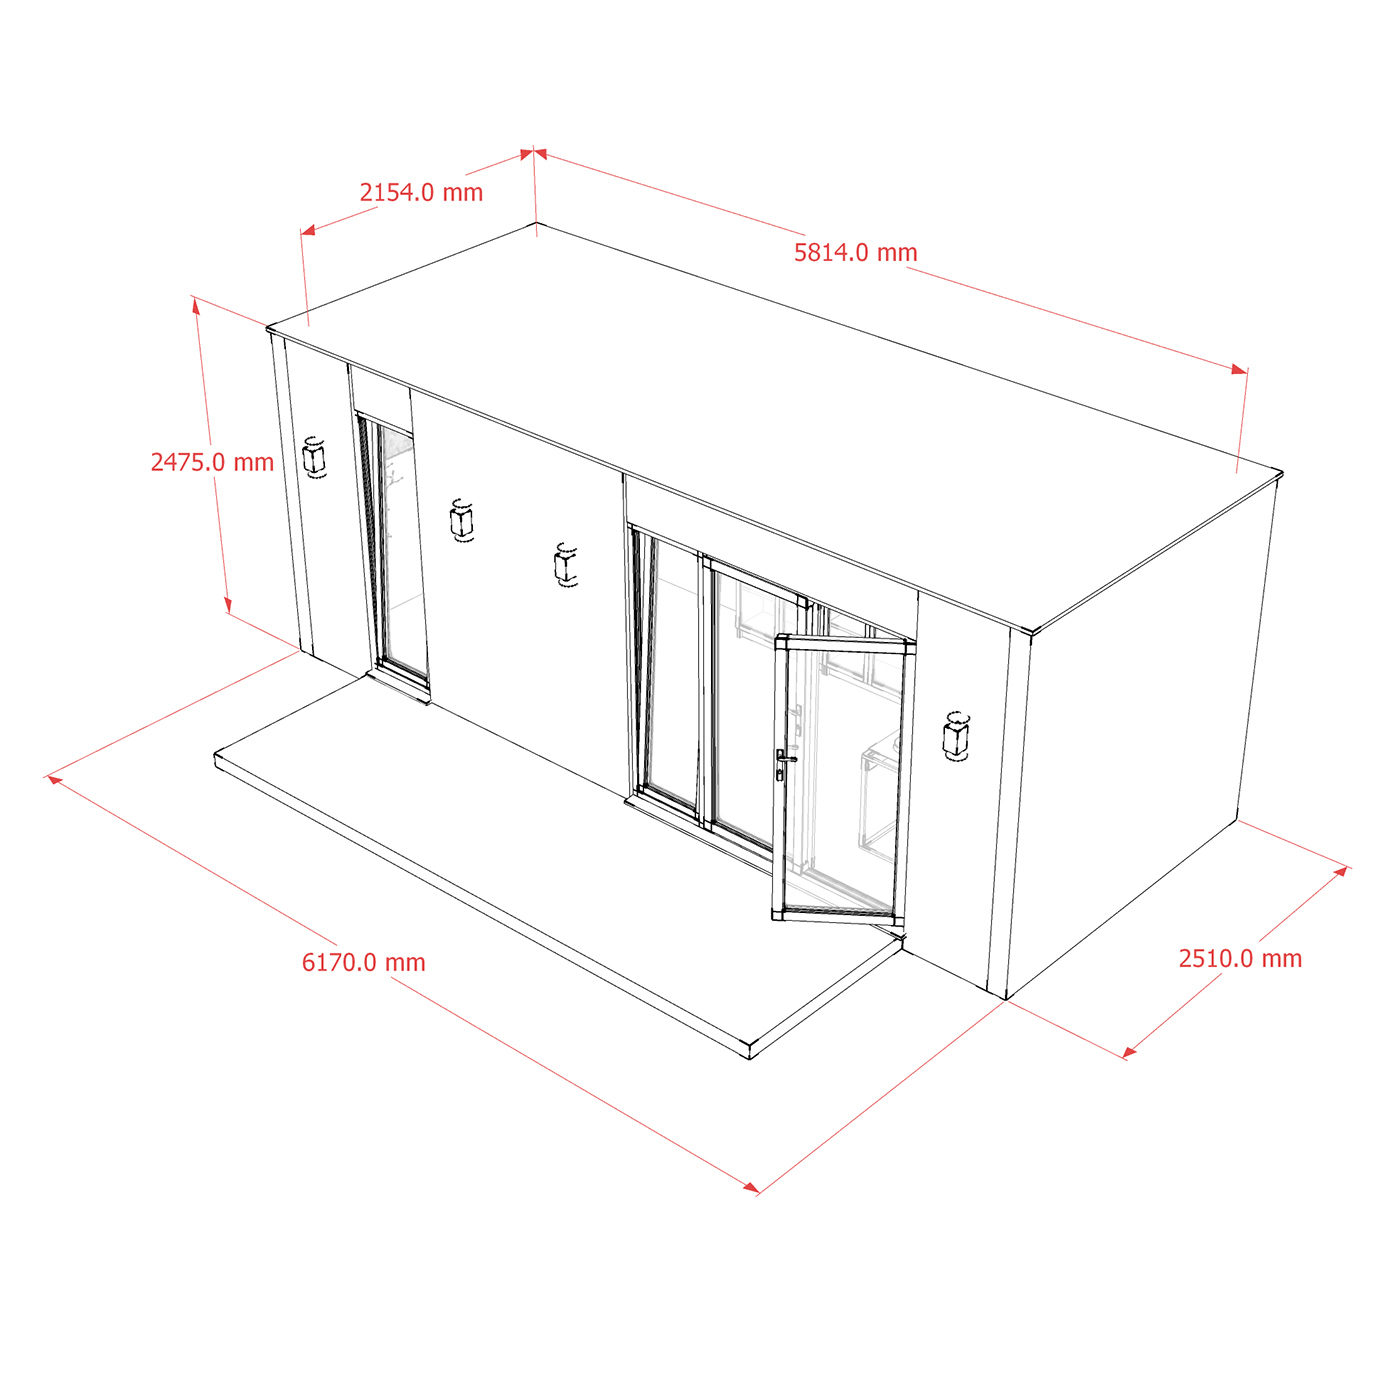 Exterior dimensions of 2.6m by 6.2m garden room